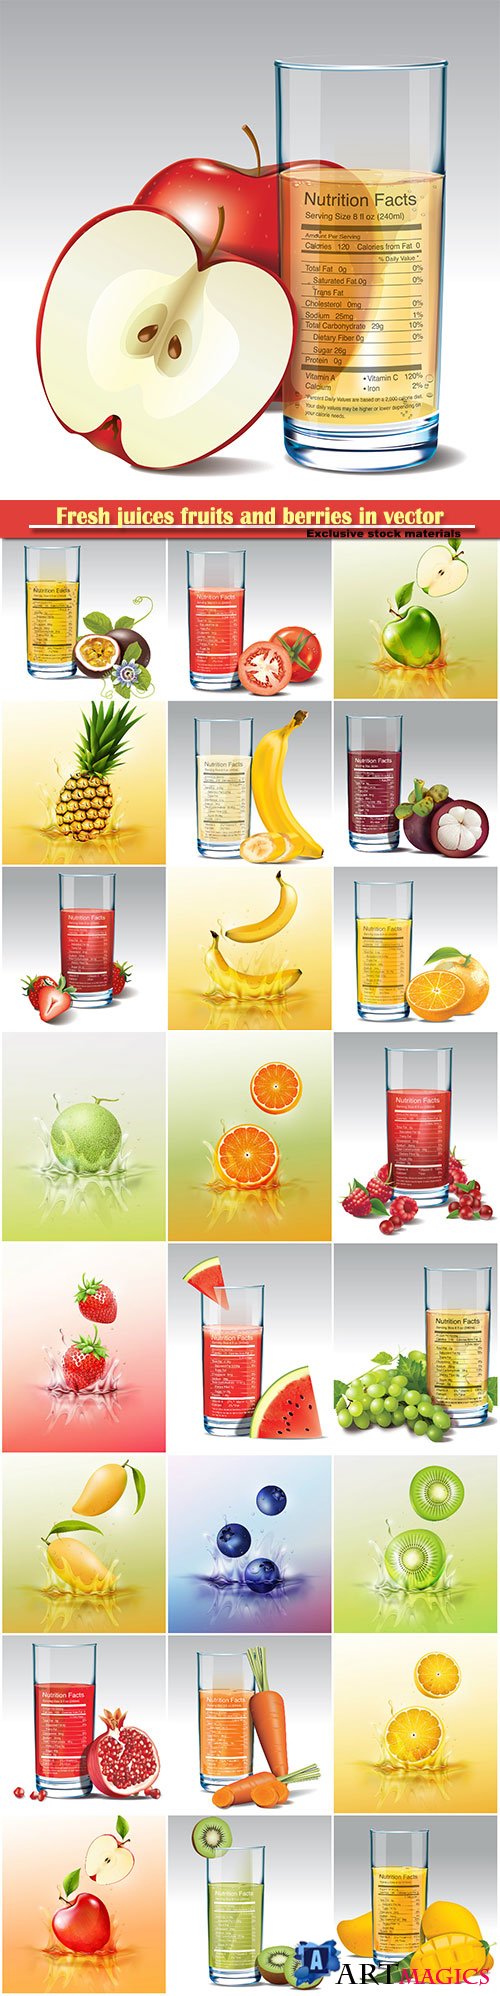 Fresh juices fruits and berries in vector